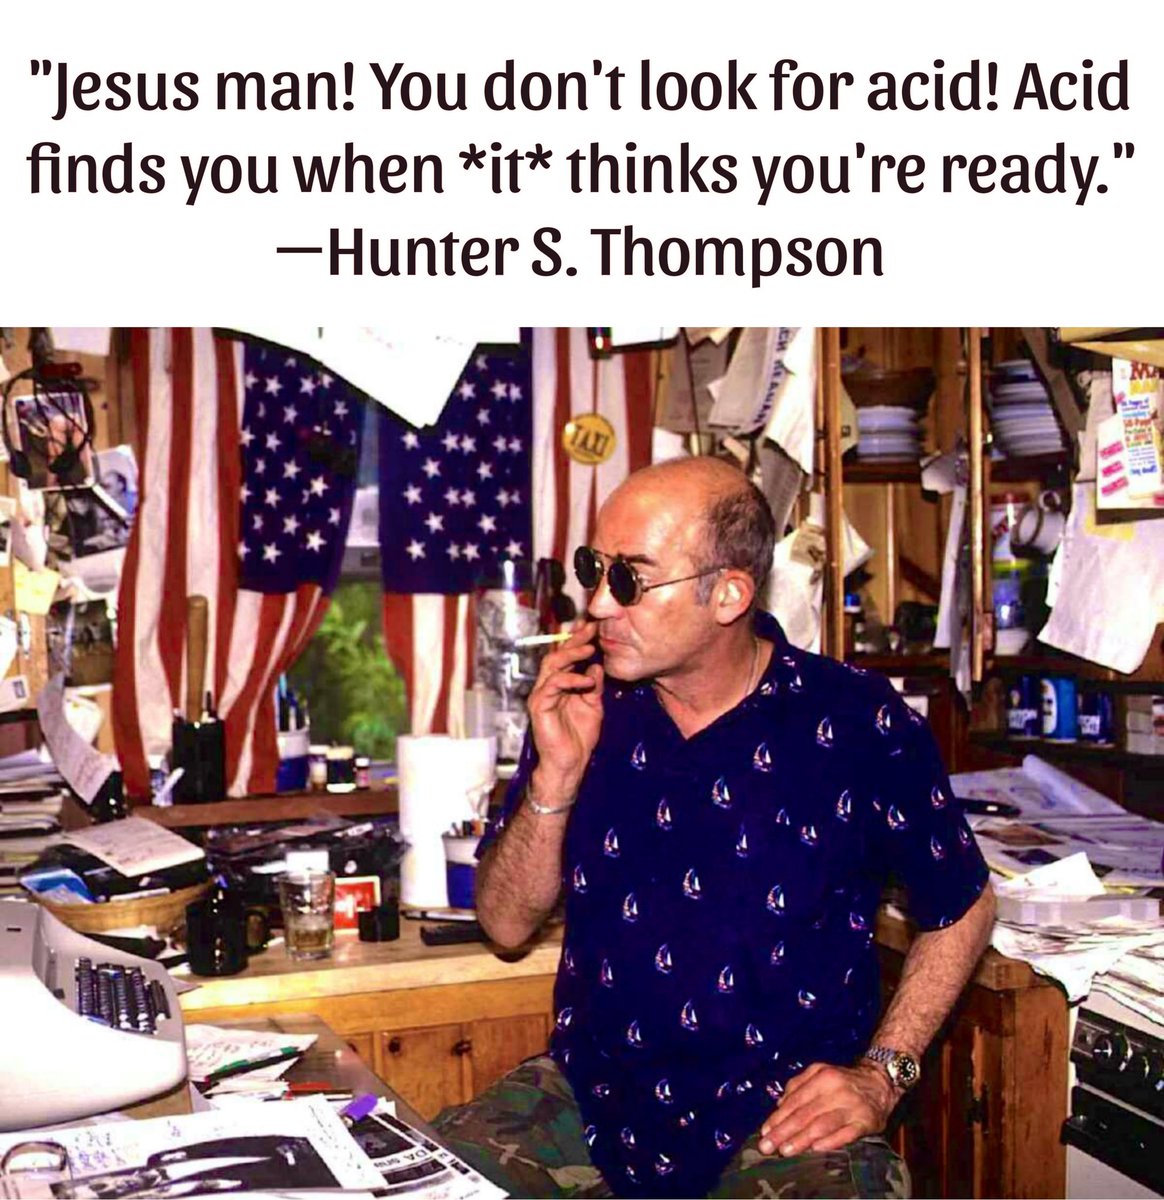 Love this Hunter S. Thompson quote 😎🦇🦇